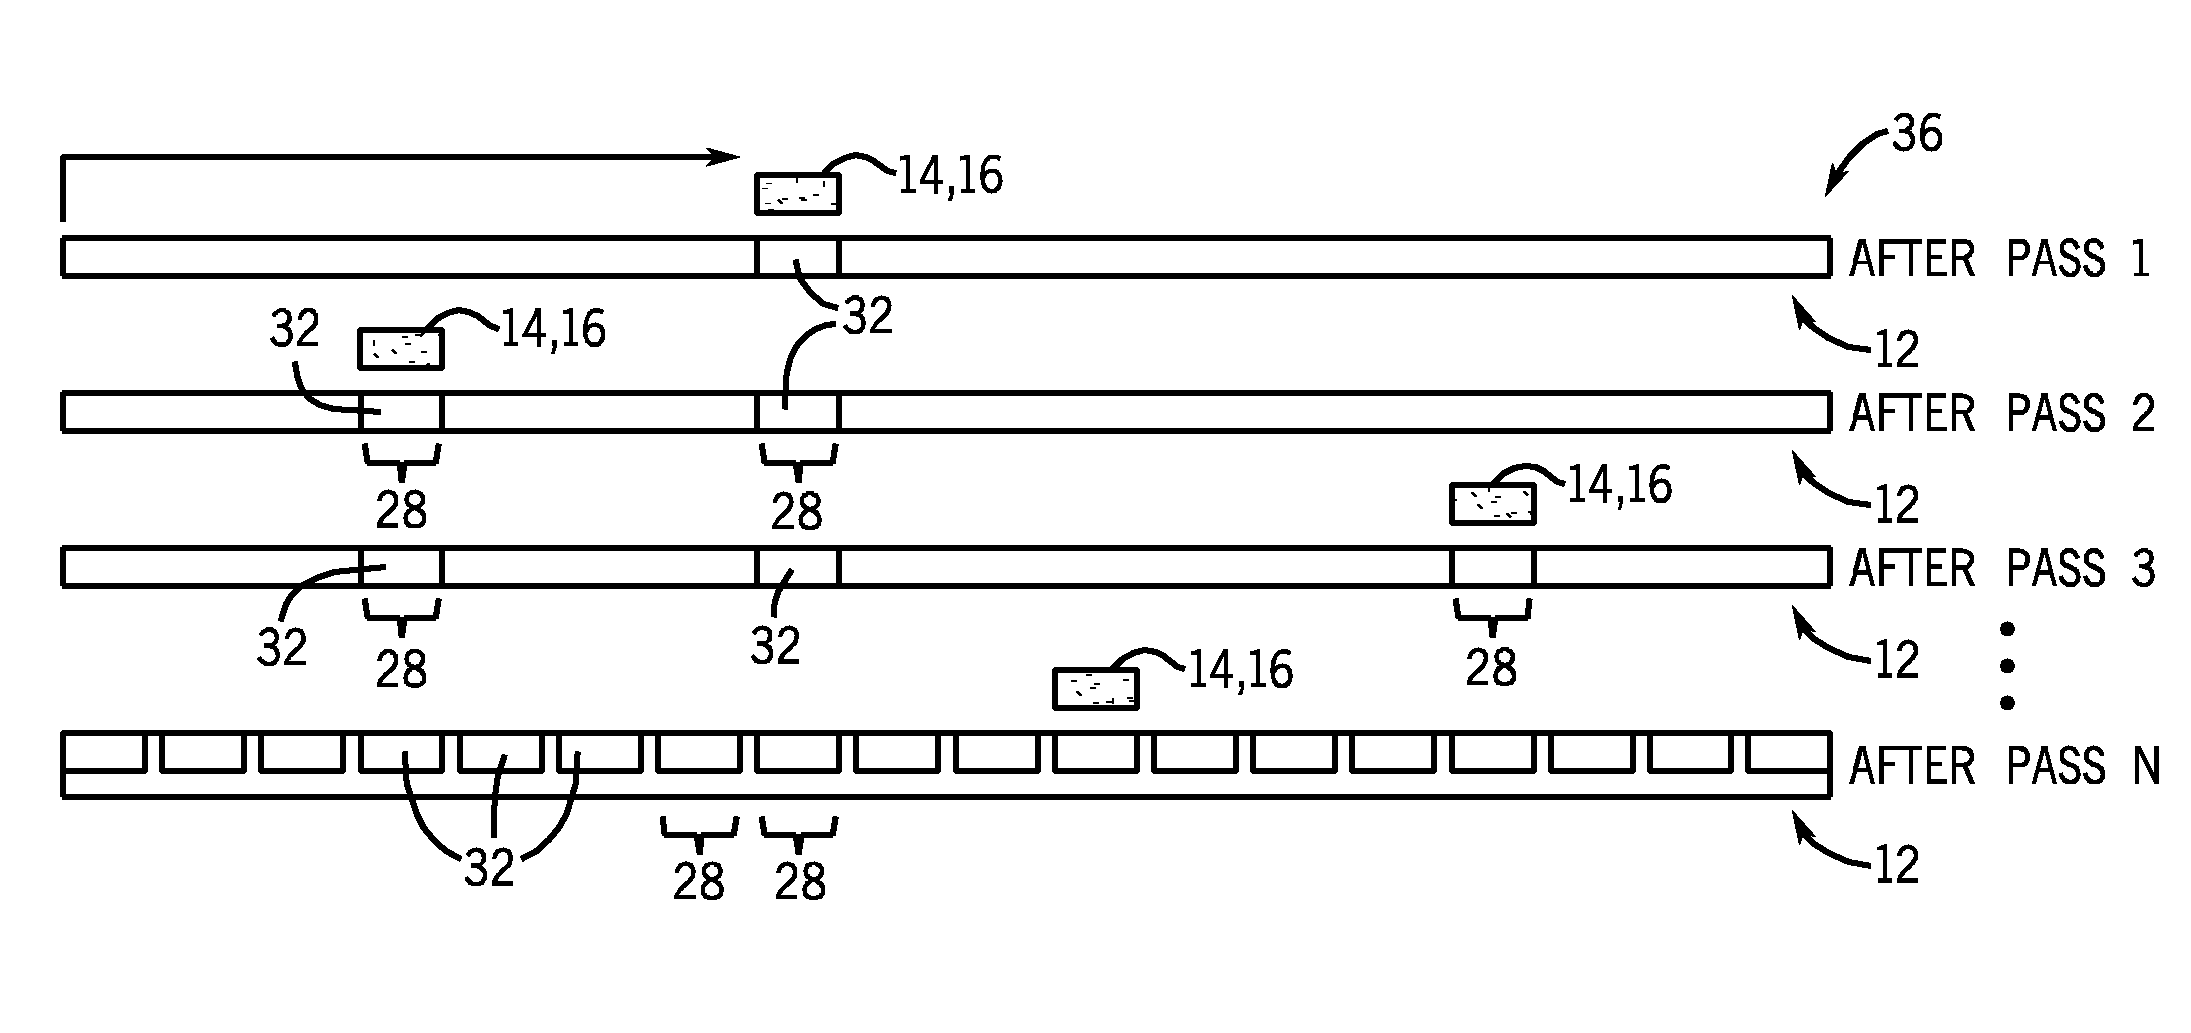 Apparatus and method for monitoring of infrastructure condition